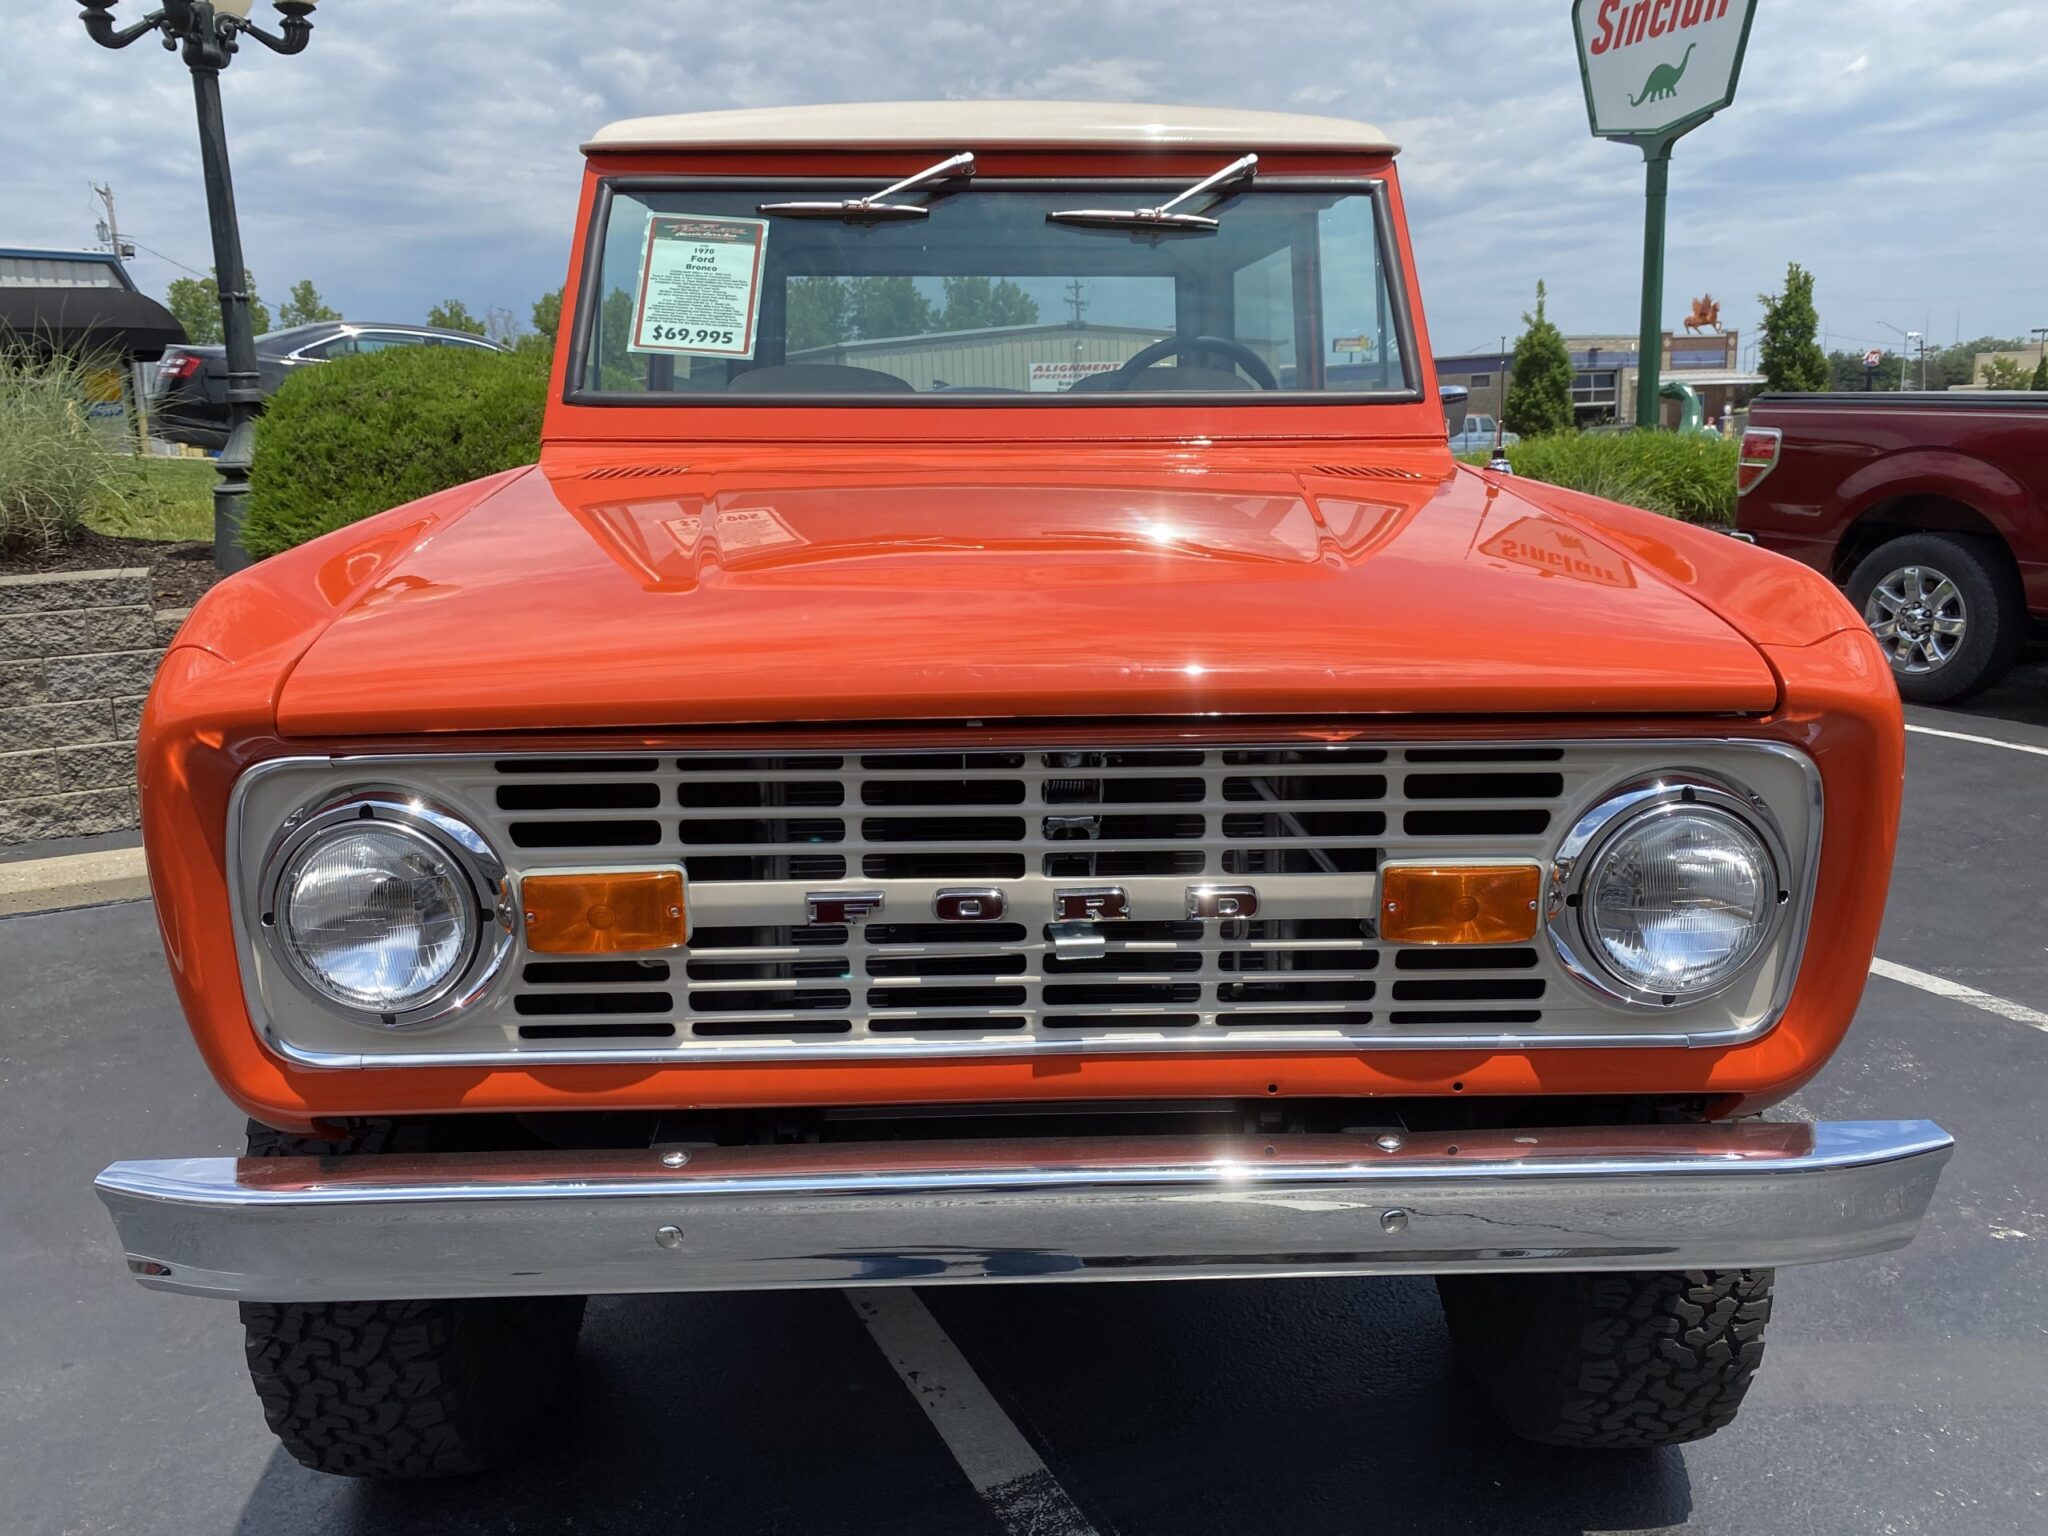 Classic Car Inspection Of A 1970 Ford Bronco At Fast Lane Classic Cars In St Charles, Mo